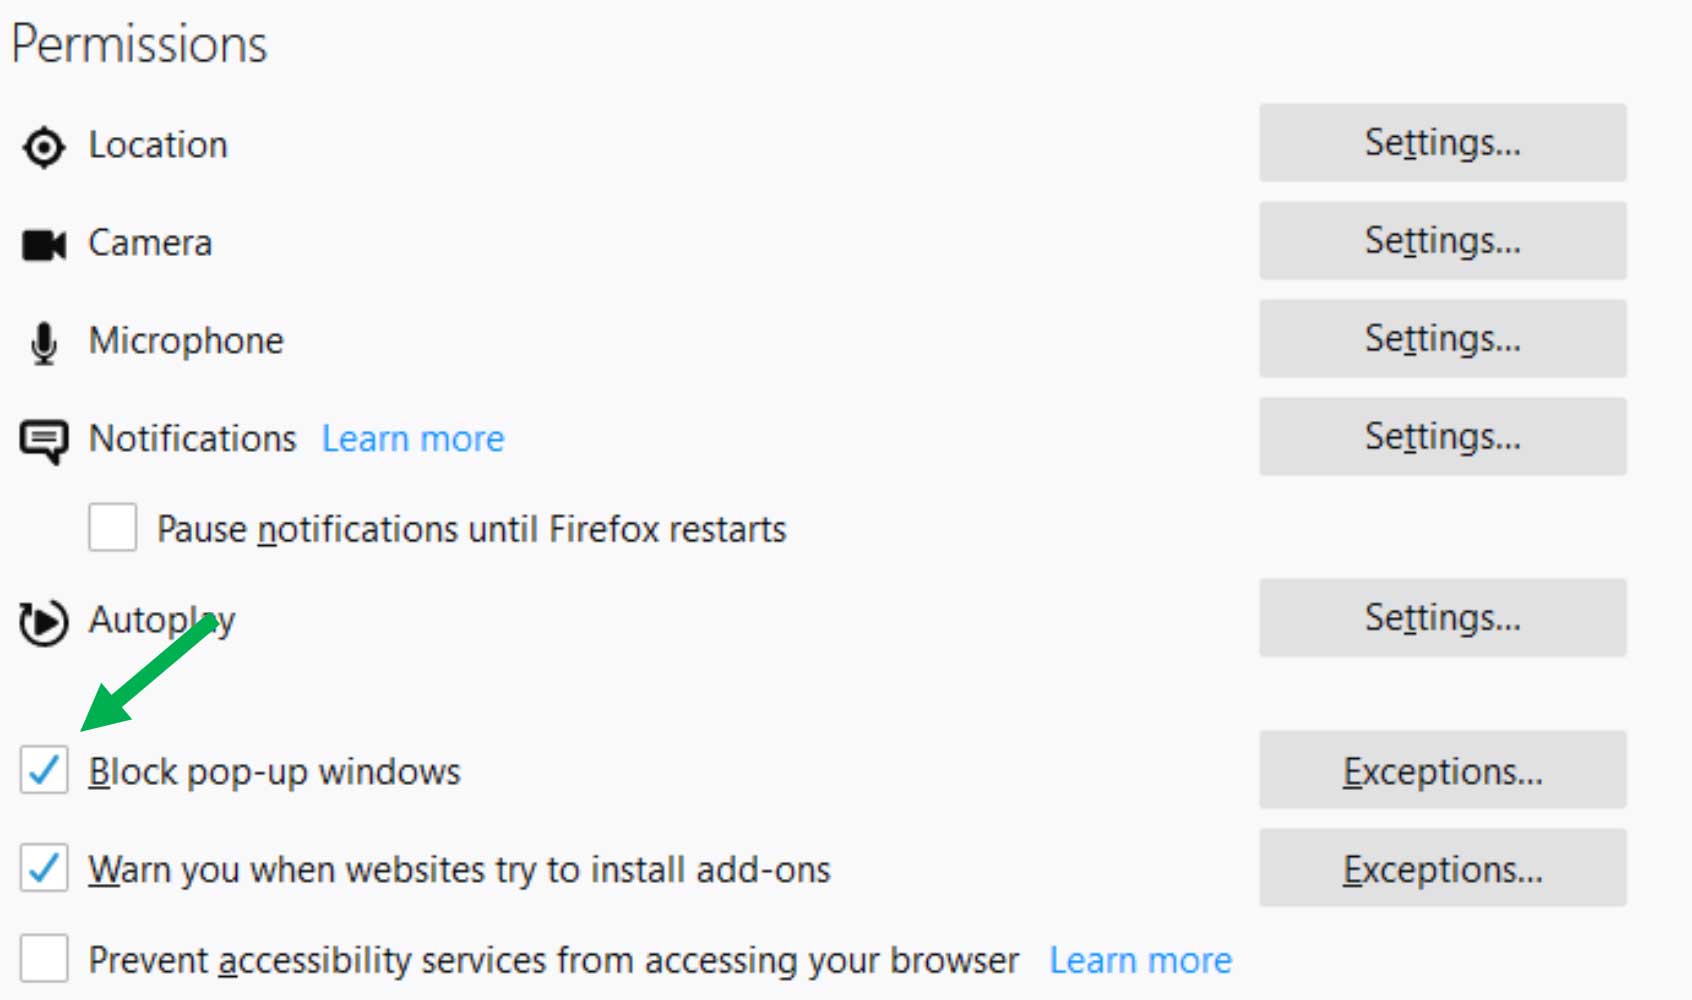 Firex Permissions section screen